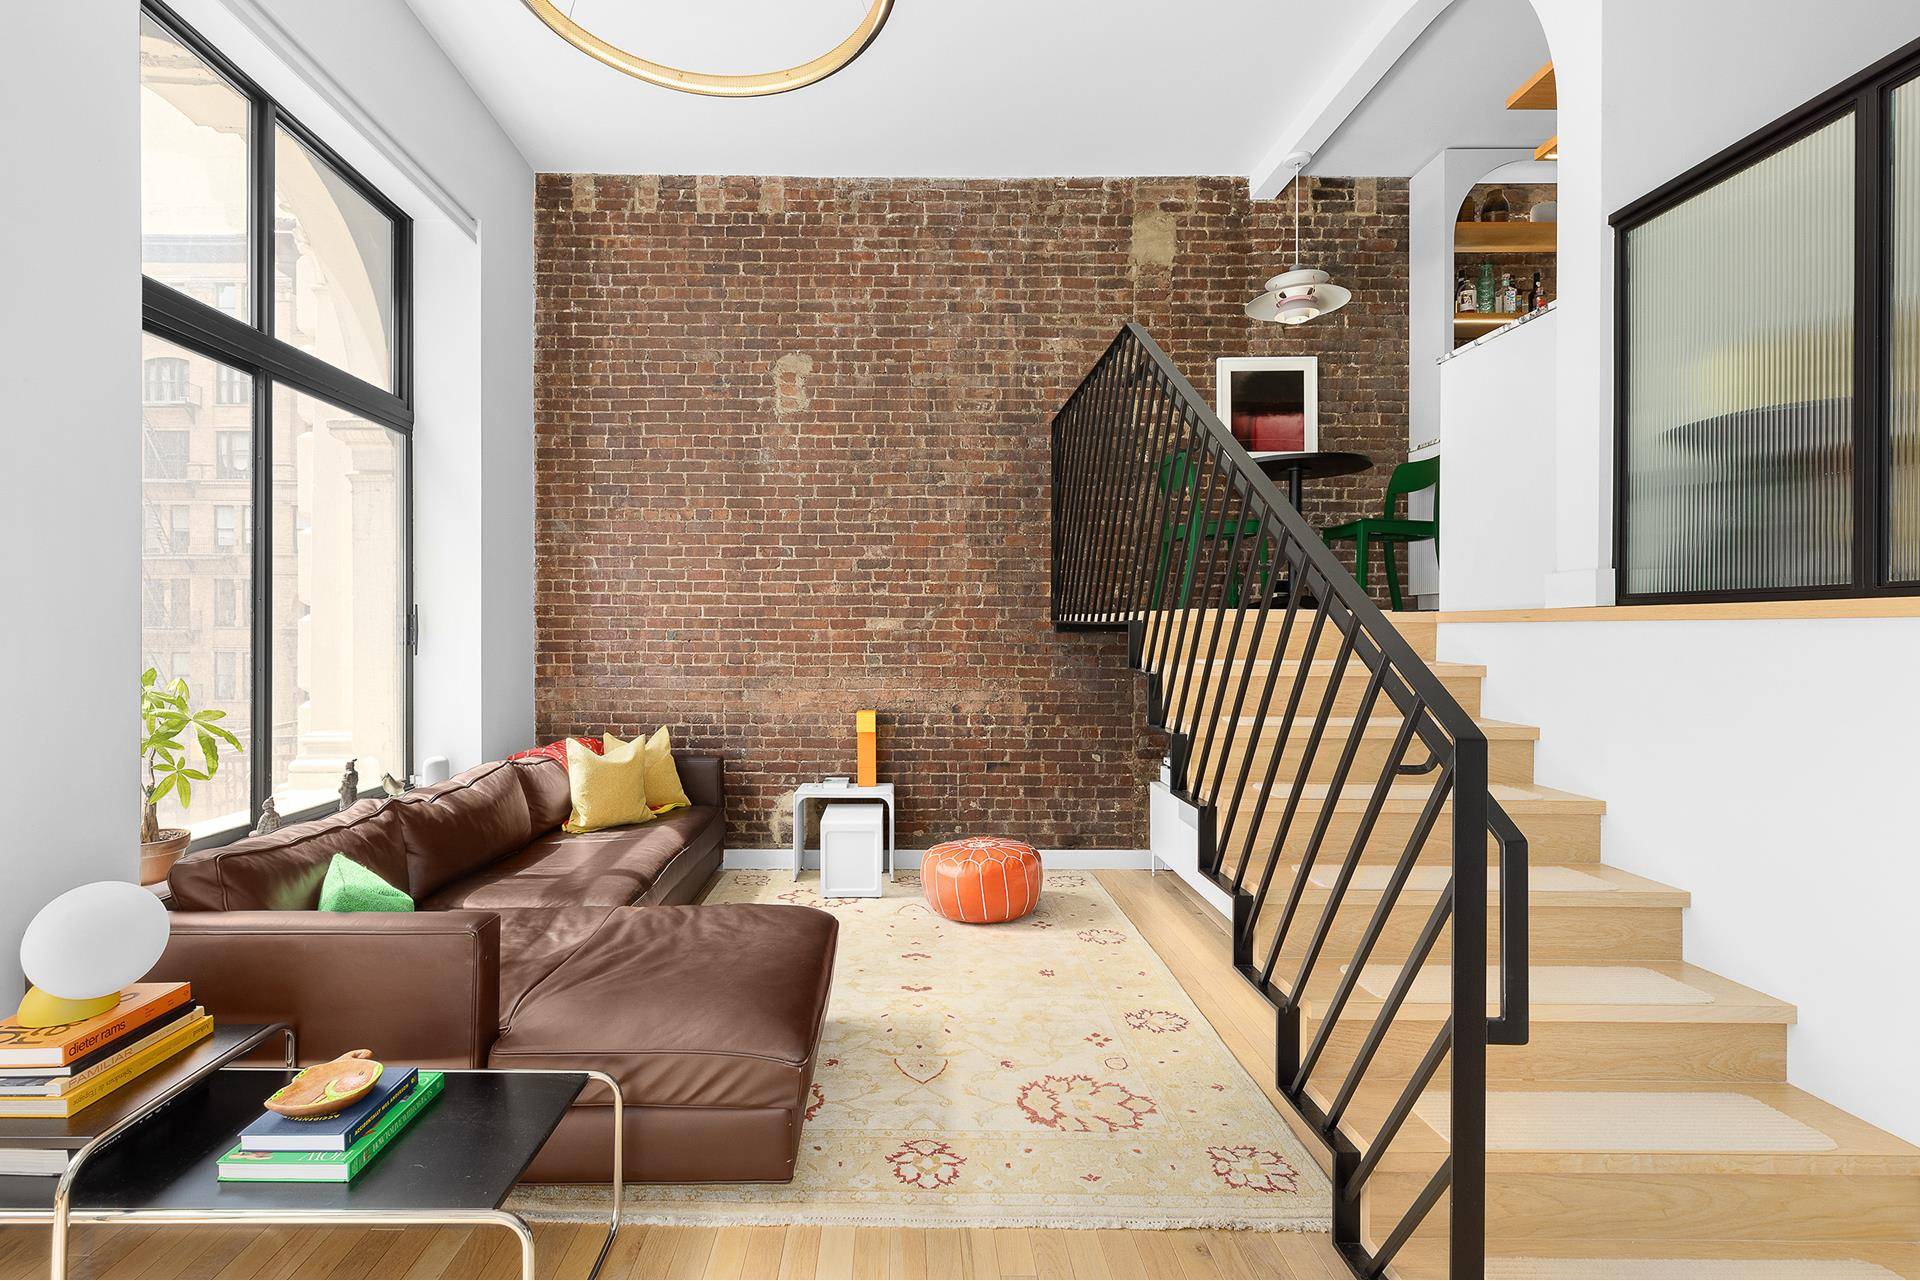 Upon stepping into this exquisite designer duplex loft, you'll be welcomed by an entry foyer adorned with arched doorways, a nod to the building's rich history.